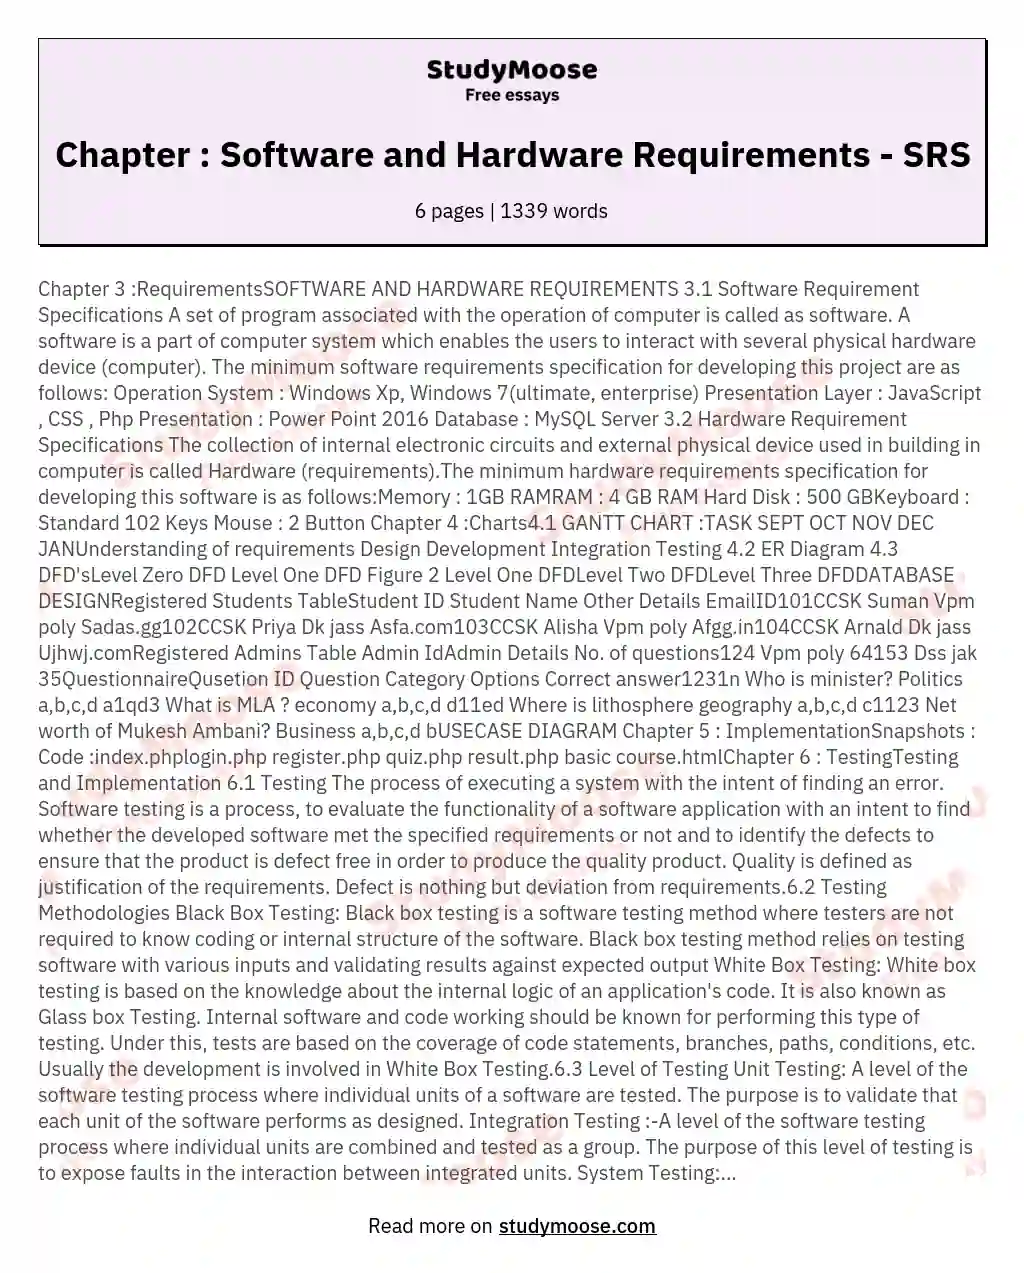 Chapter 3 RequirementsSOFTWARE AND HARDWARE REQUIREMENTS 31 Software Requirement Specifications